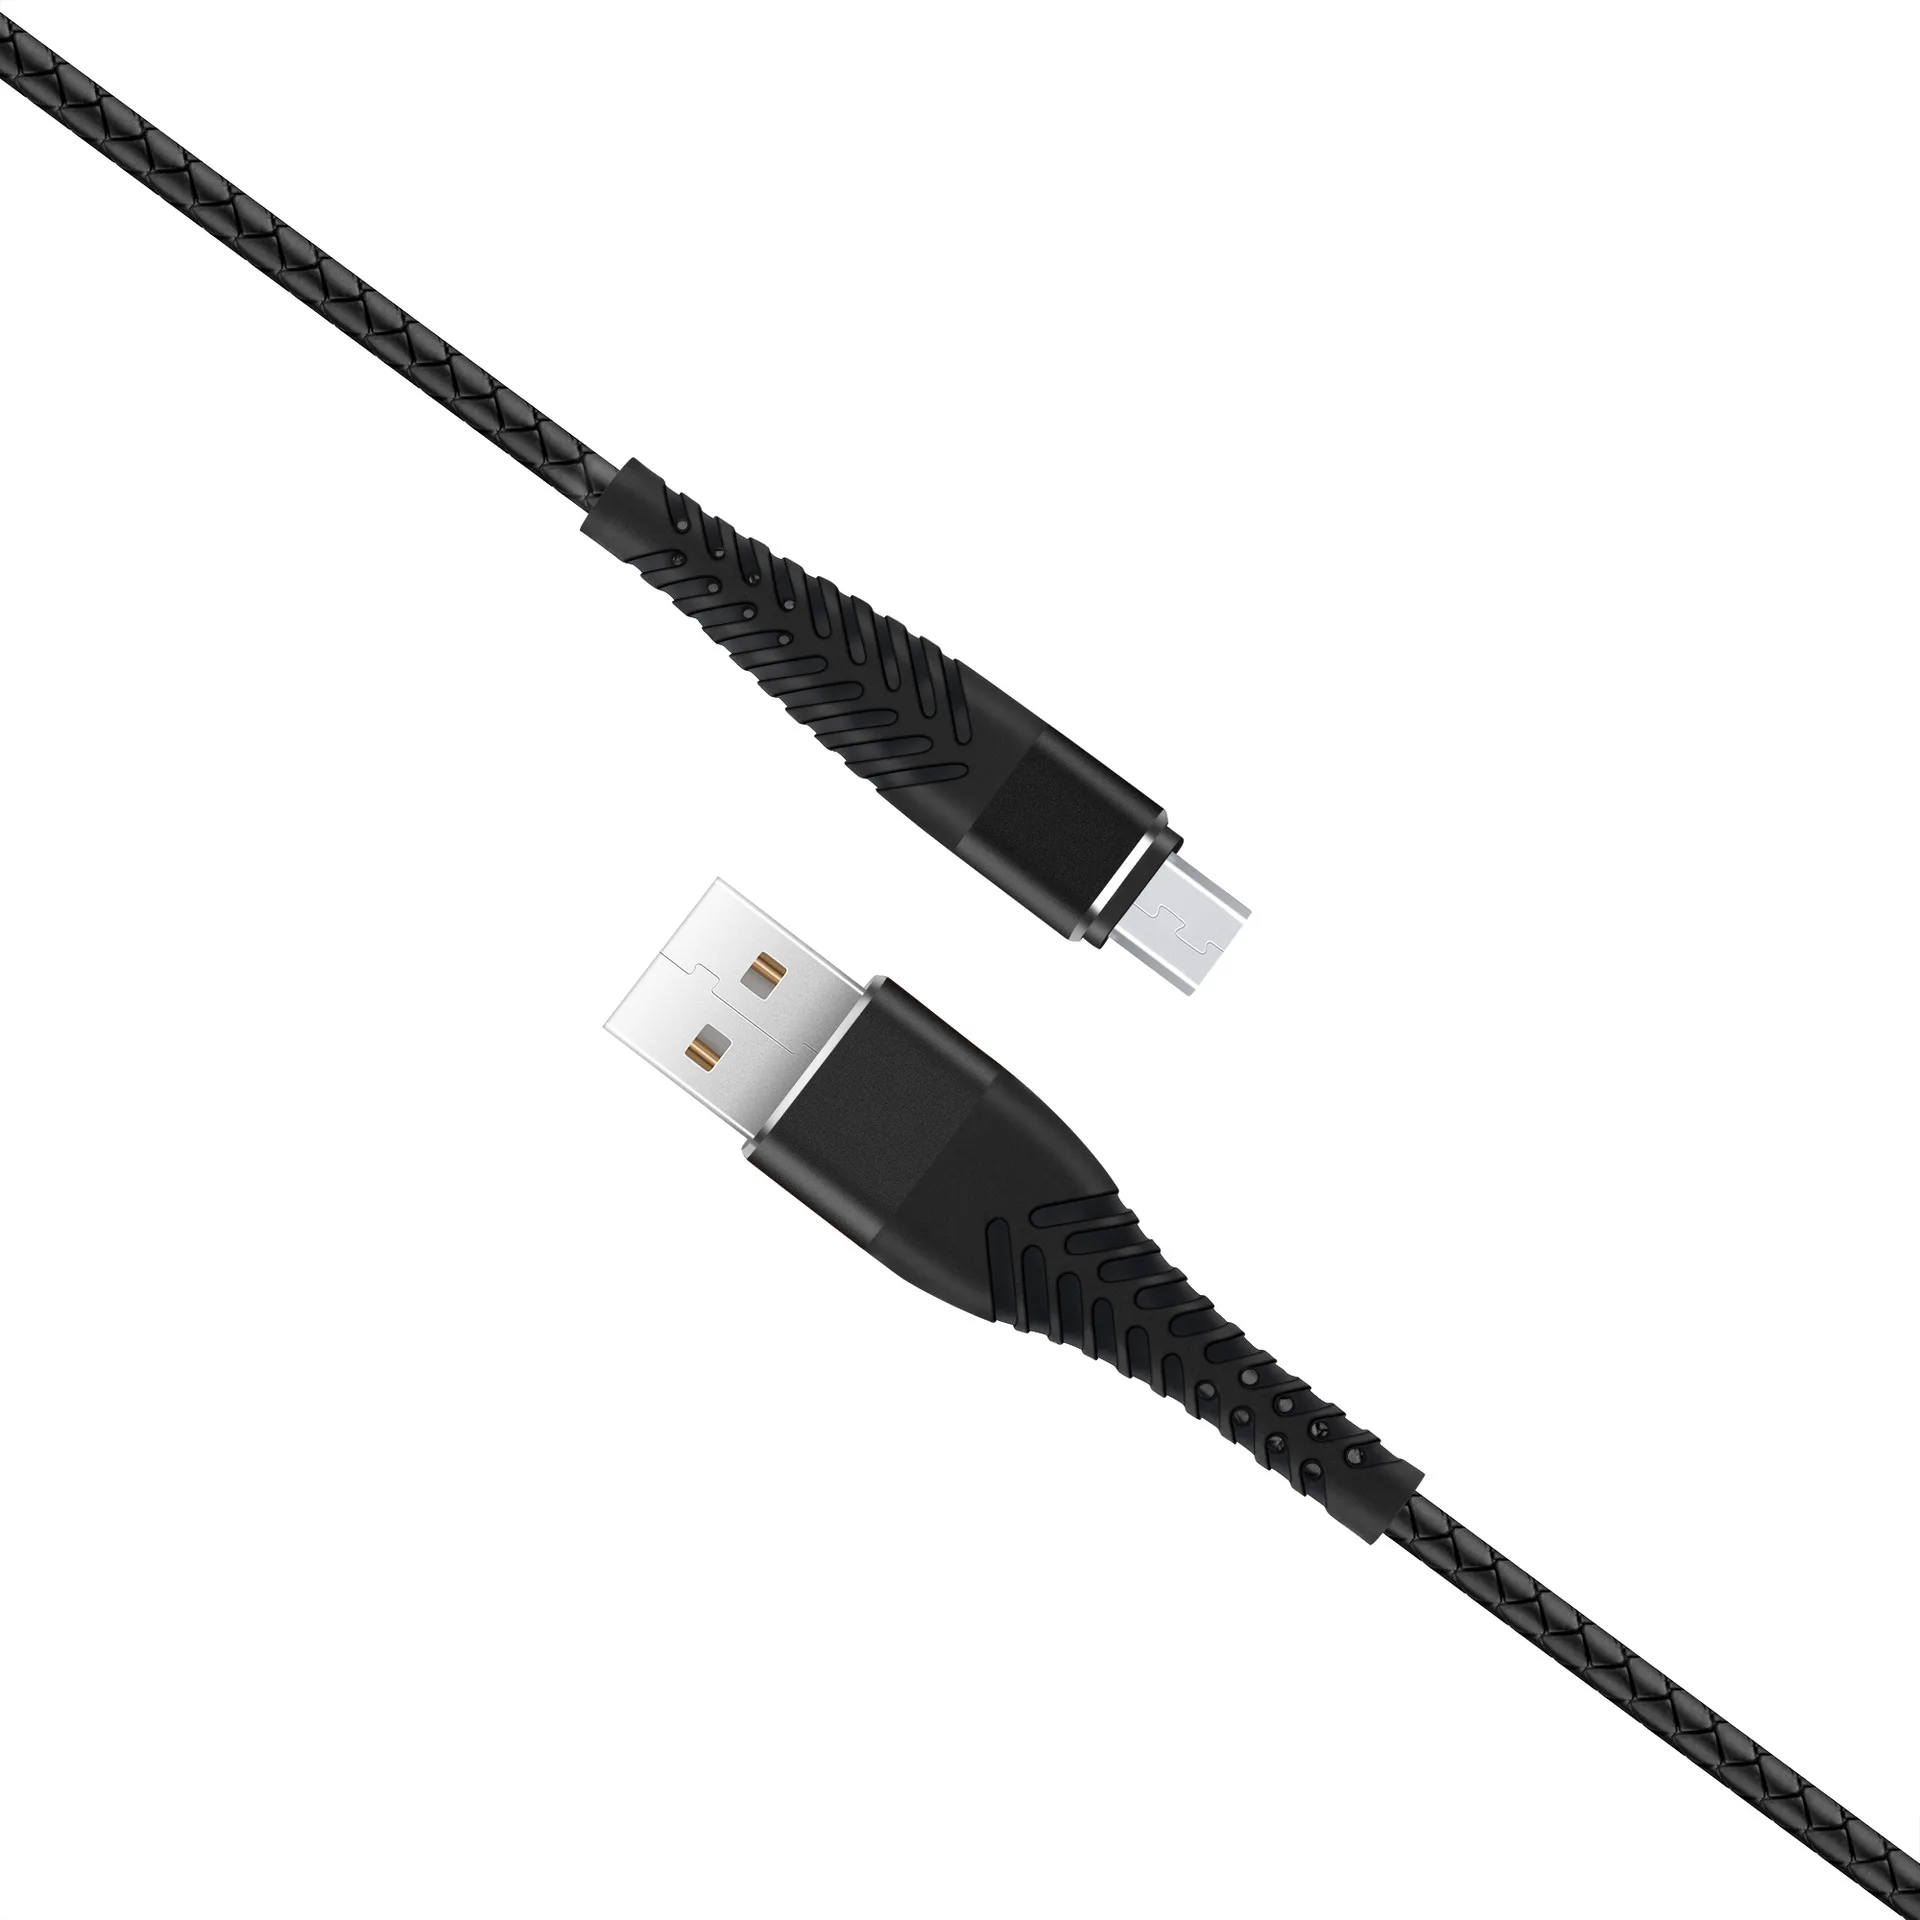 

Aluminum alloy & braided cable Micro USB Sync Data Charger Cable for Samsung Galaxy S4 S5 S6 S7 Android Iphone smartphone, Black/white/red/blue/green etc